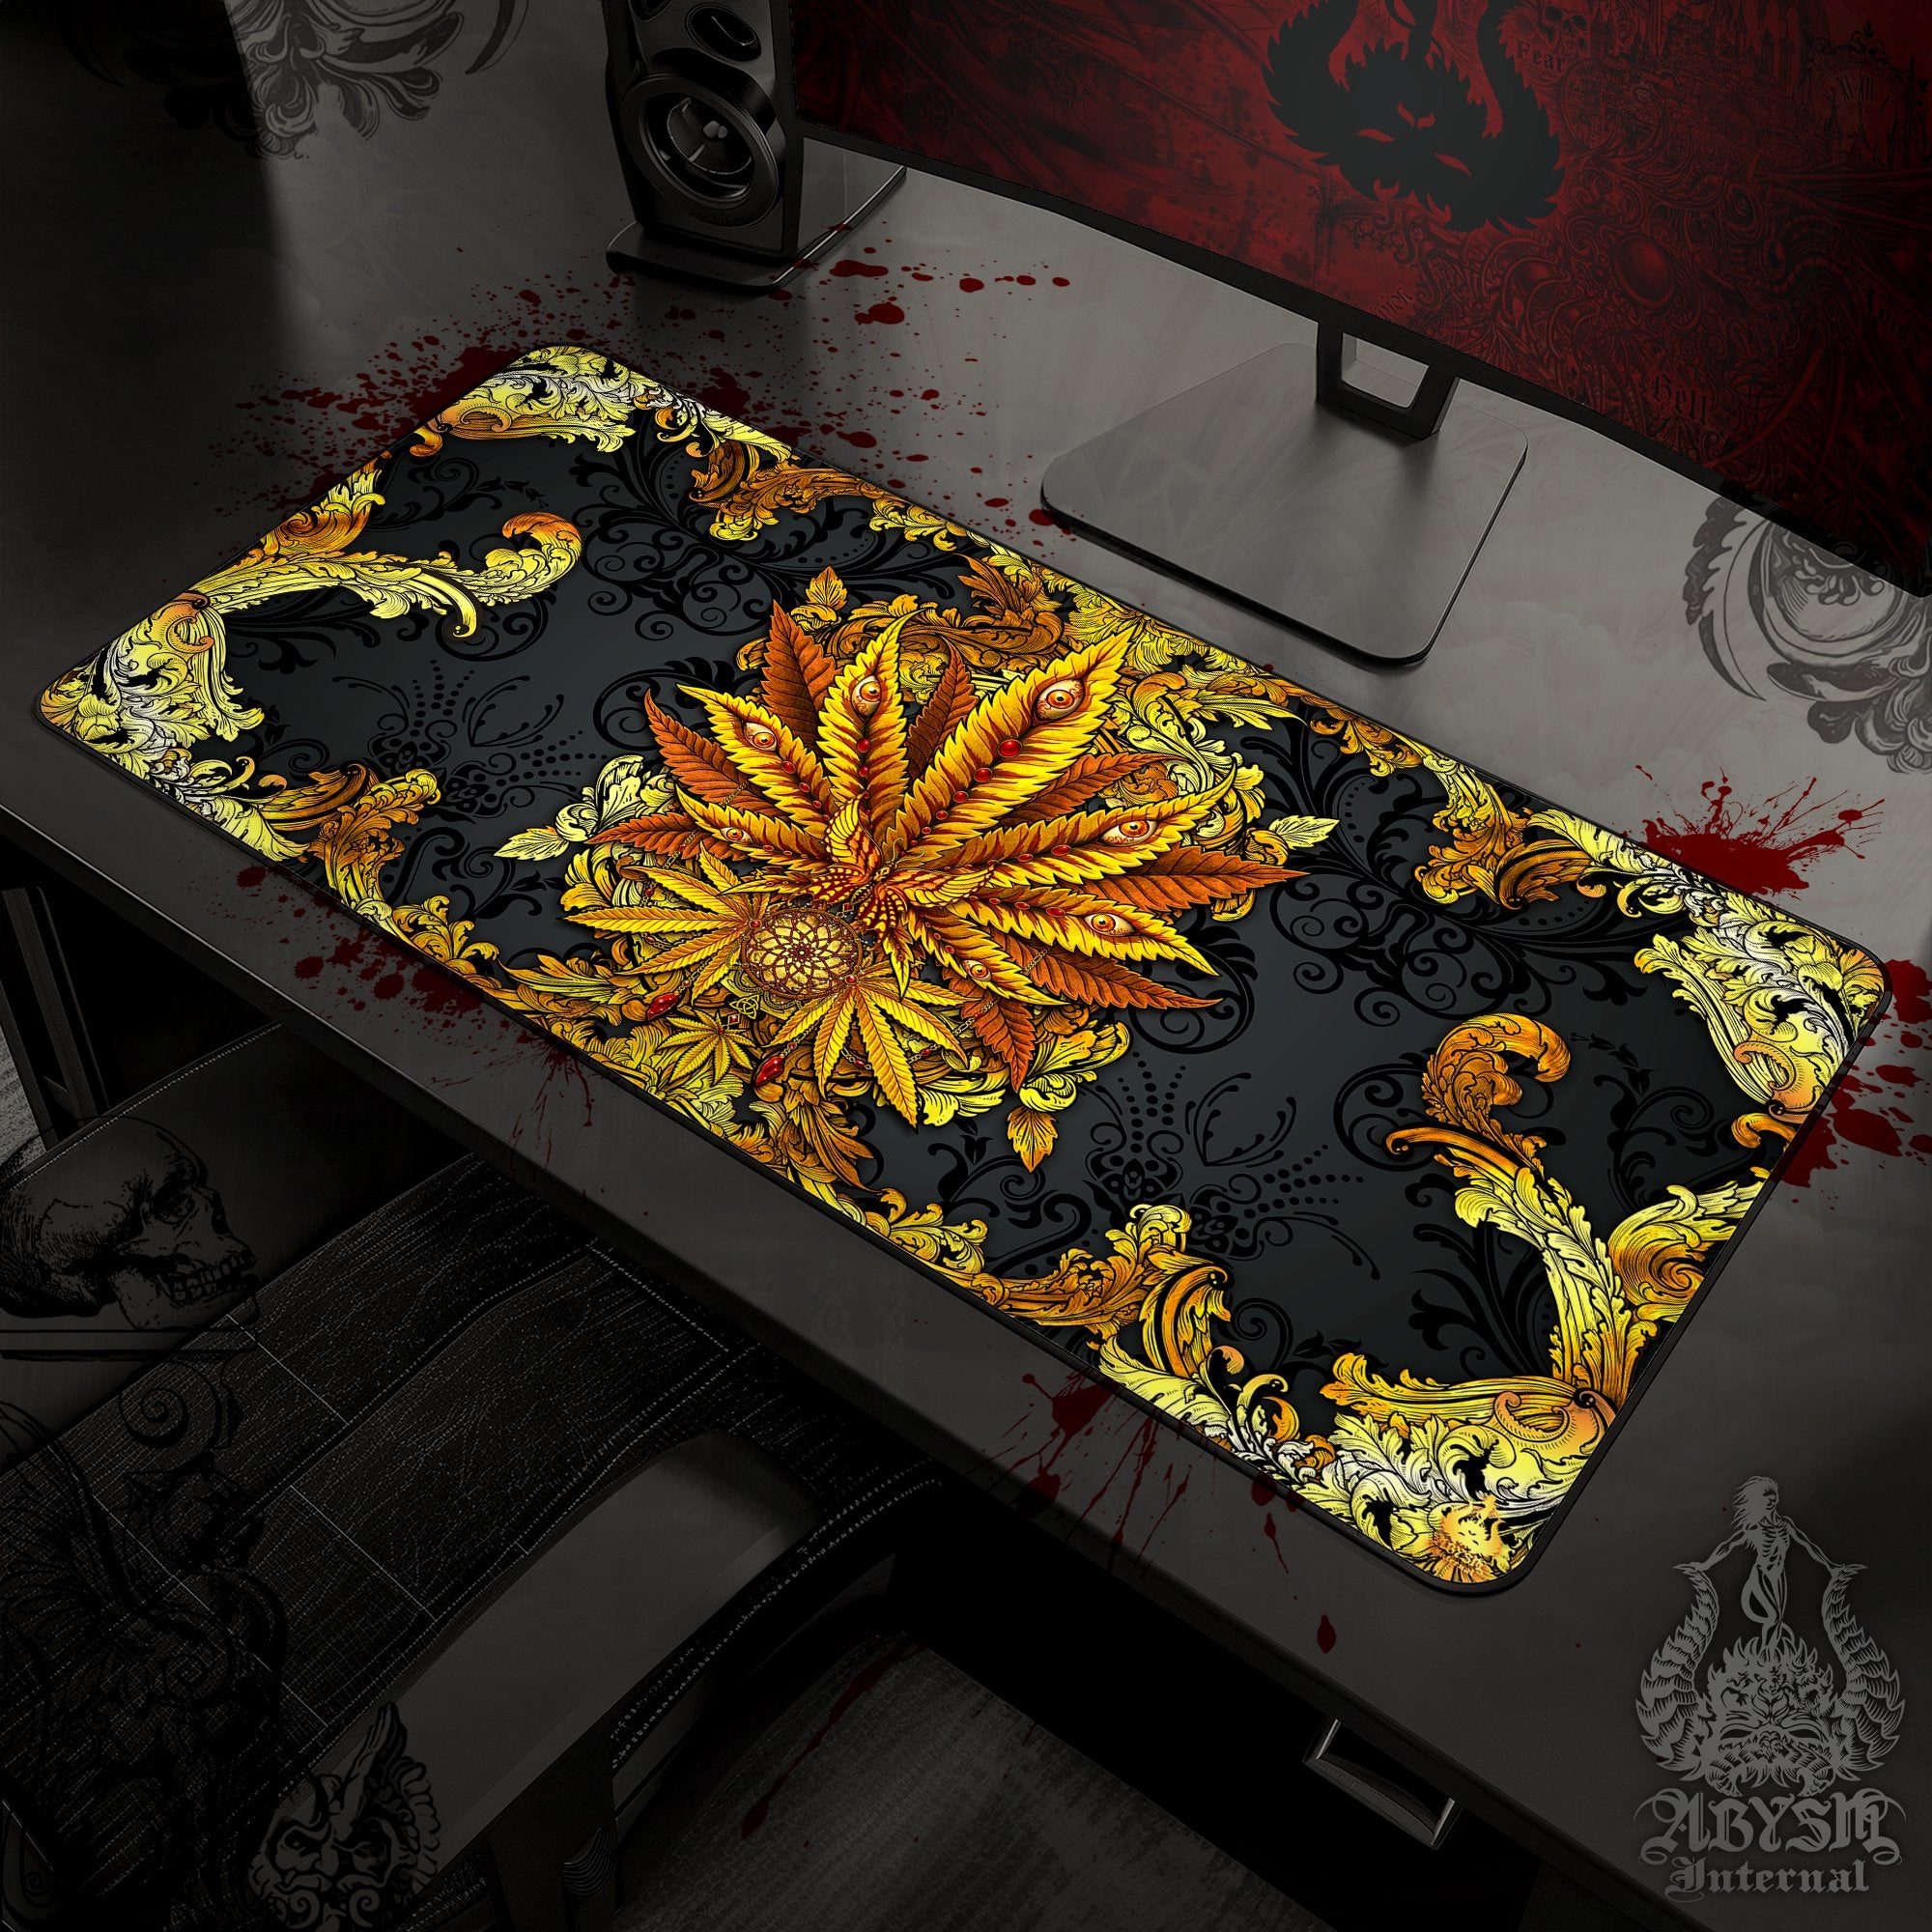 Gold Cannabis Desk Mat, Weed Gaming Mouse Pad, Marijuana Table Protector Cover, 420 Workpad, Art Print - Abysm Internal